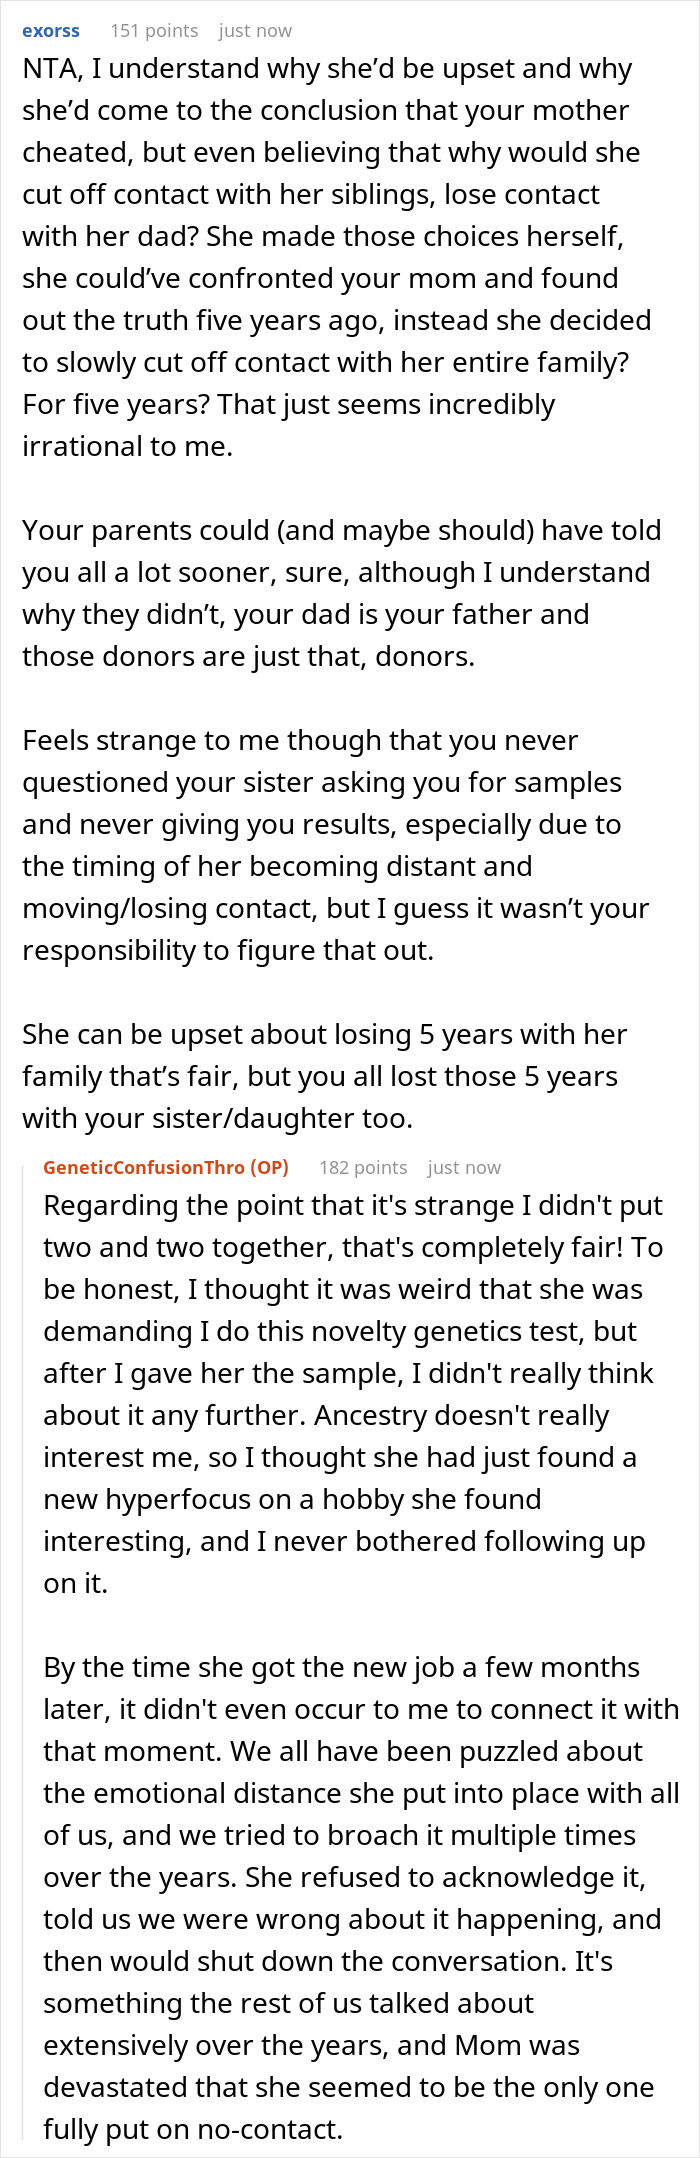 Woman Does A DNA Ancestry Test And Discovers She Isn’t Biologically Related To Her Dad, Cuts Everyone Off And Learns The Truth 5 Years Later